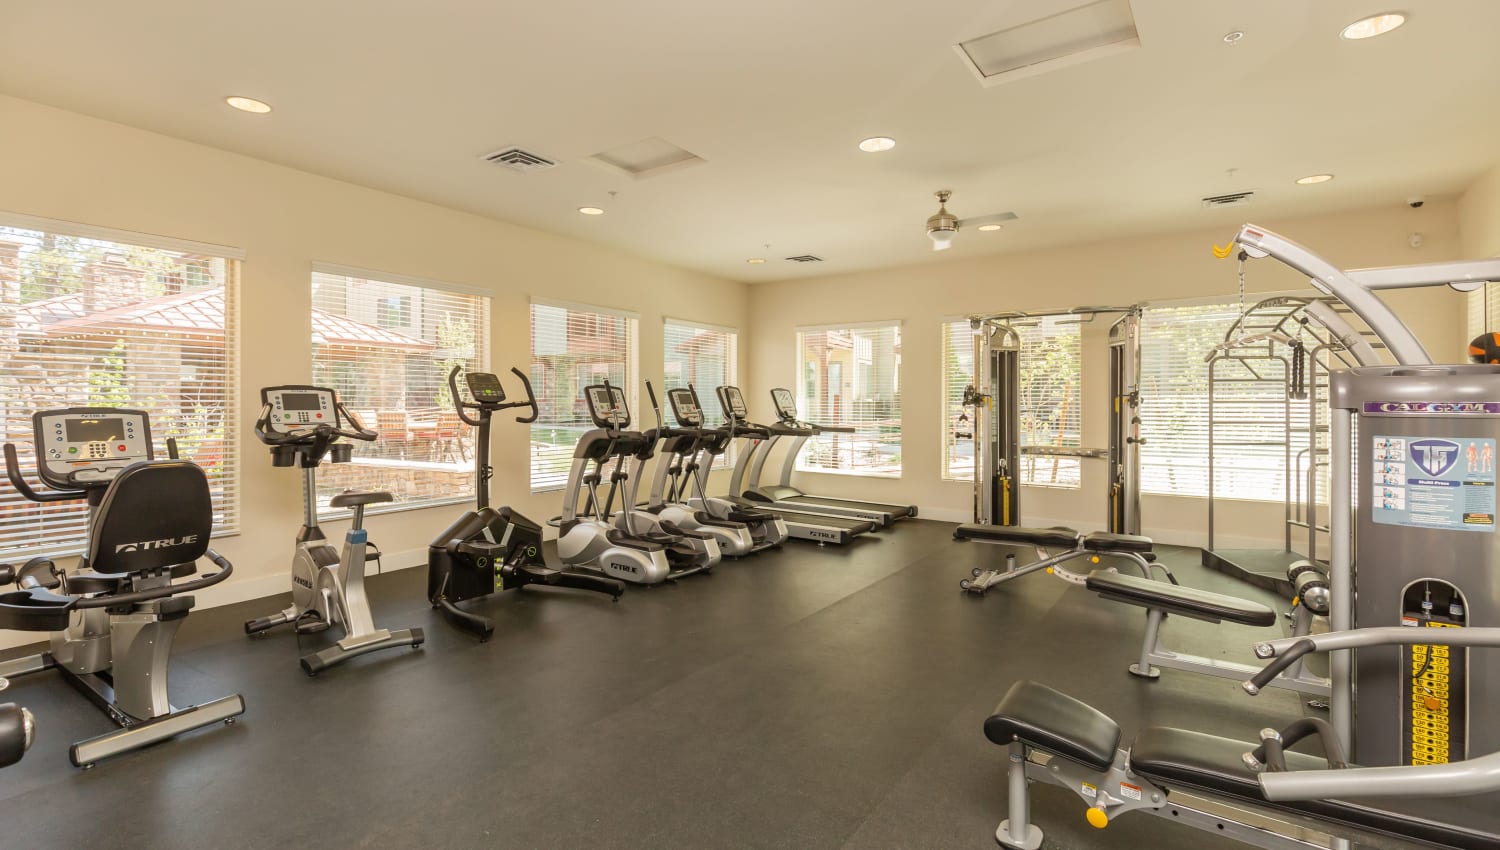 Well-equipped fitness center at Mountain Trail in Flagstaff, Arizona